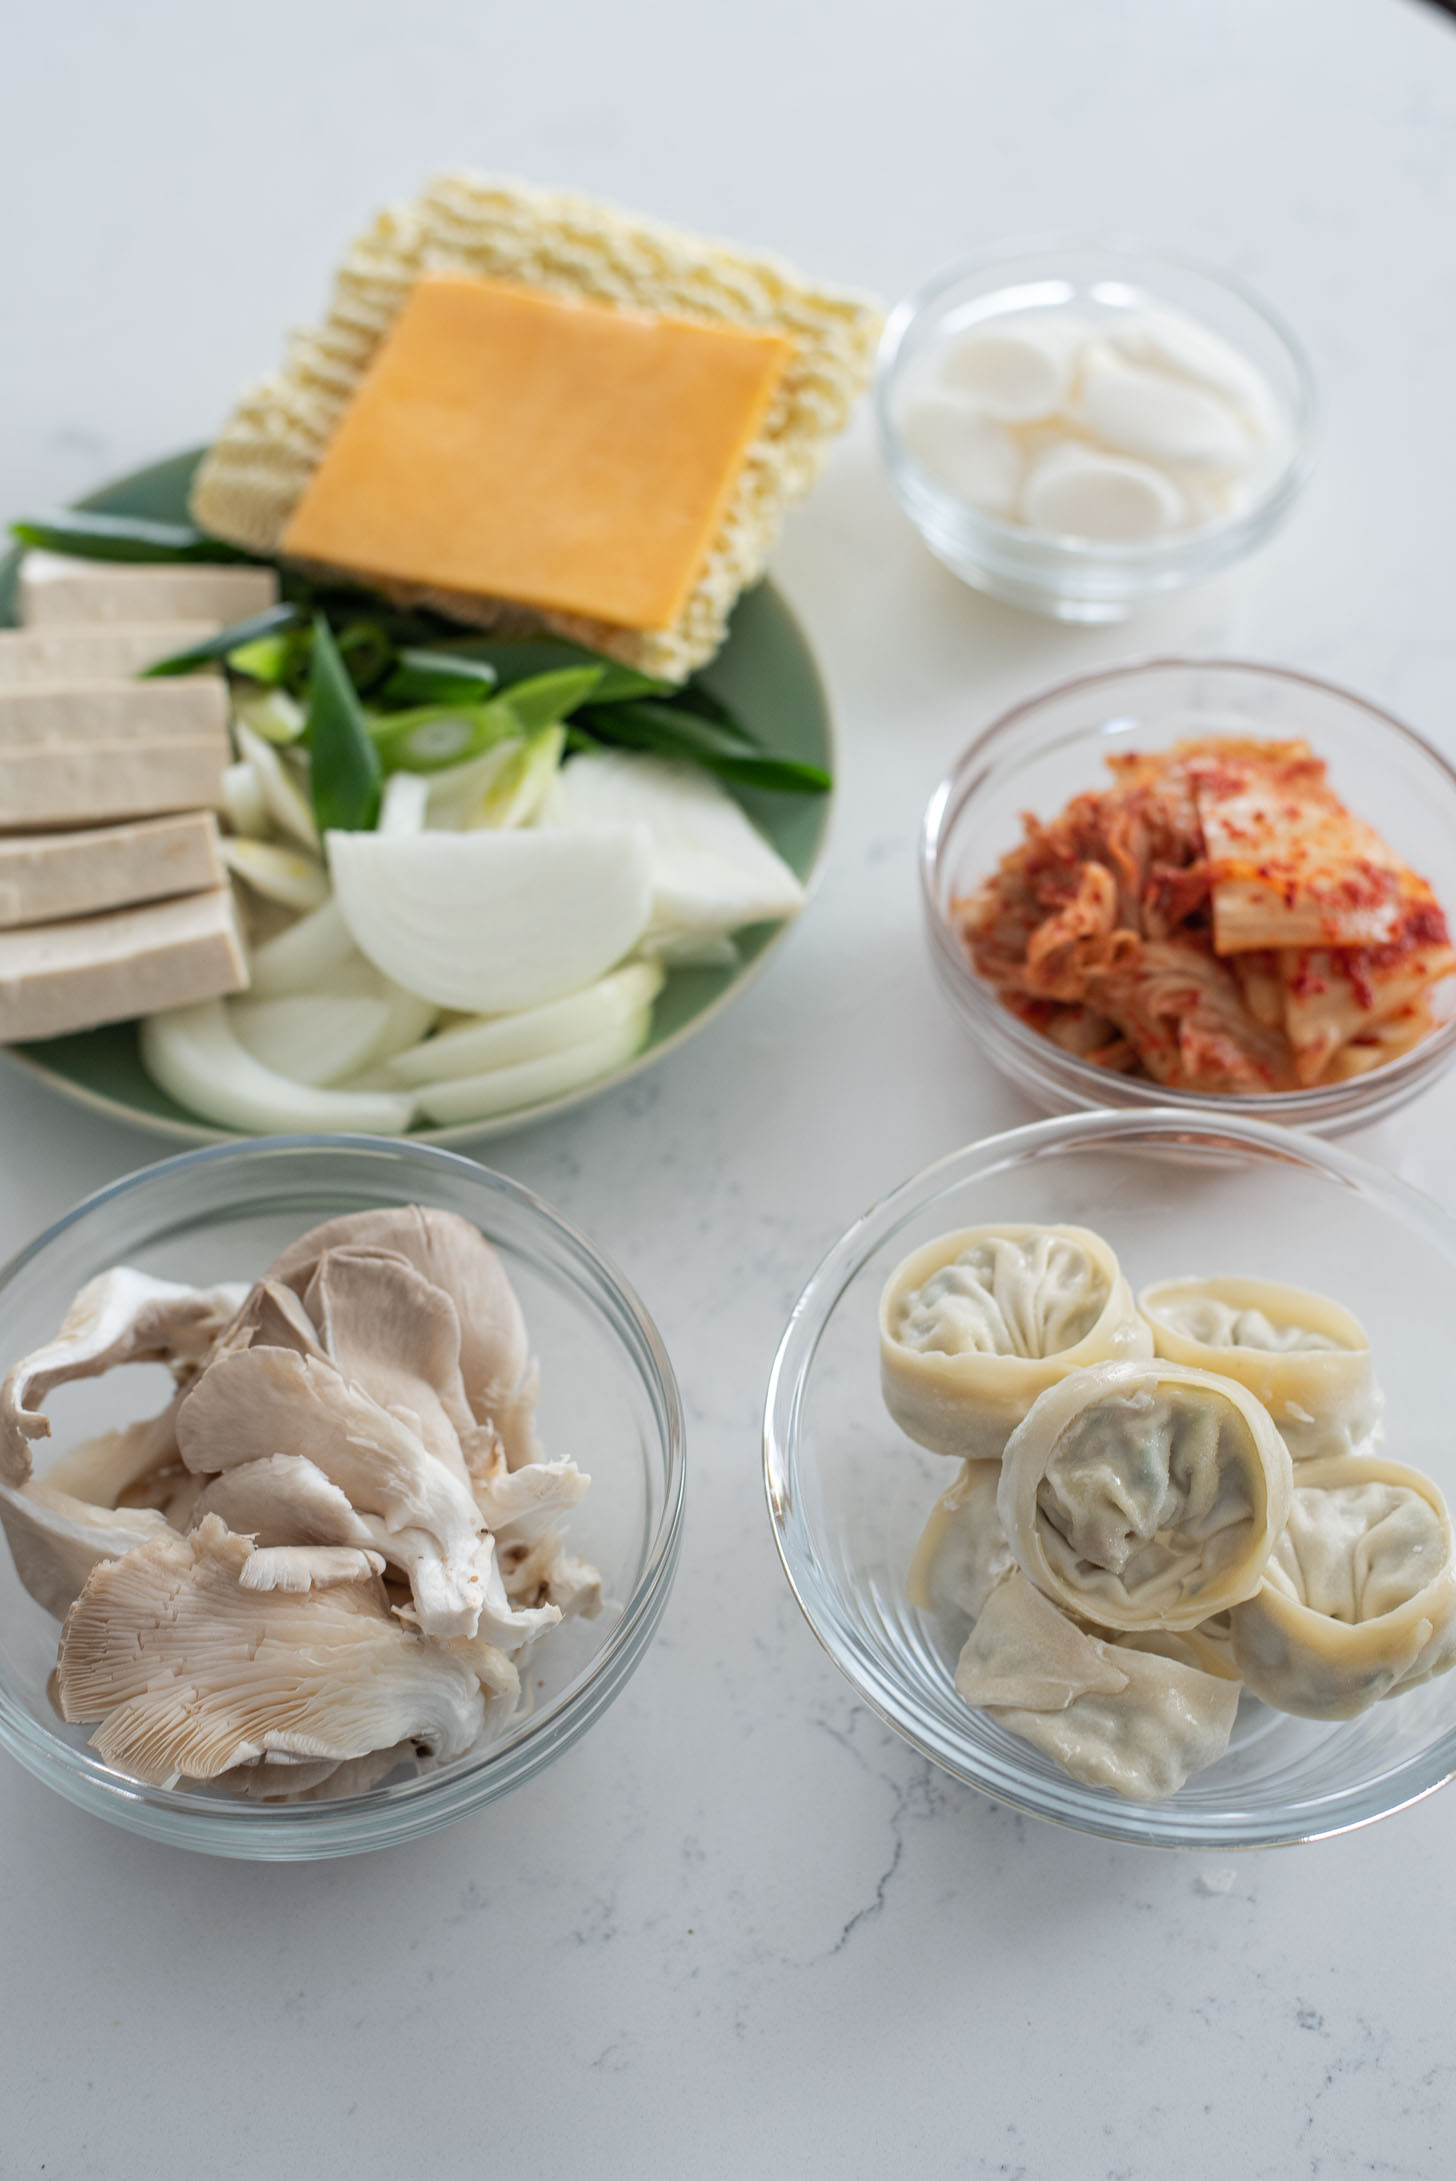 Other optional ingredients for budae jjigae recipe also known as Korean army stew.